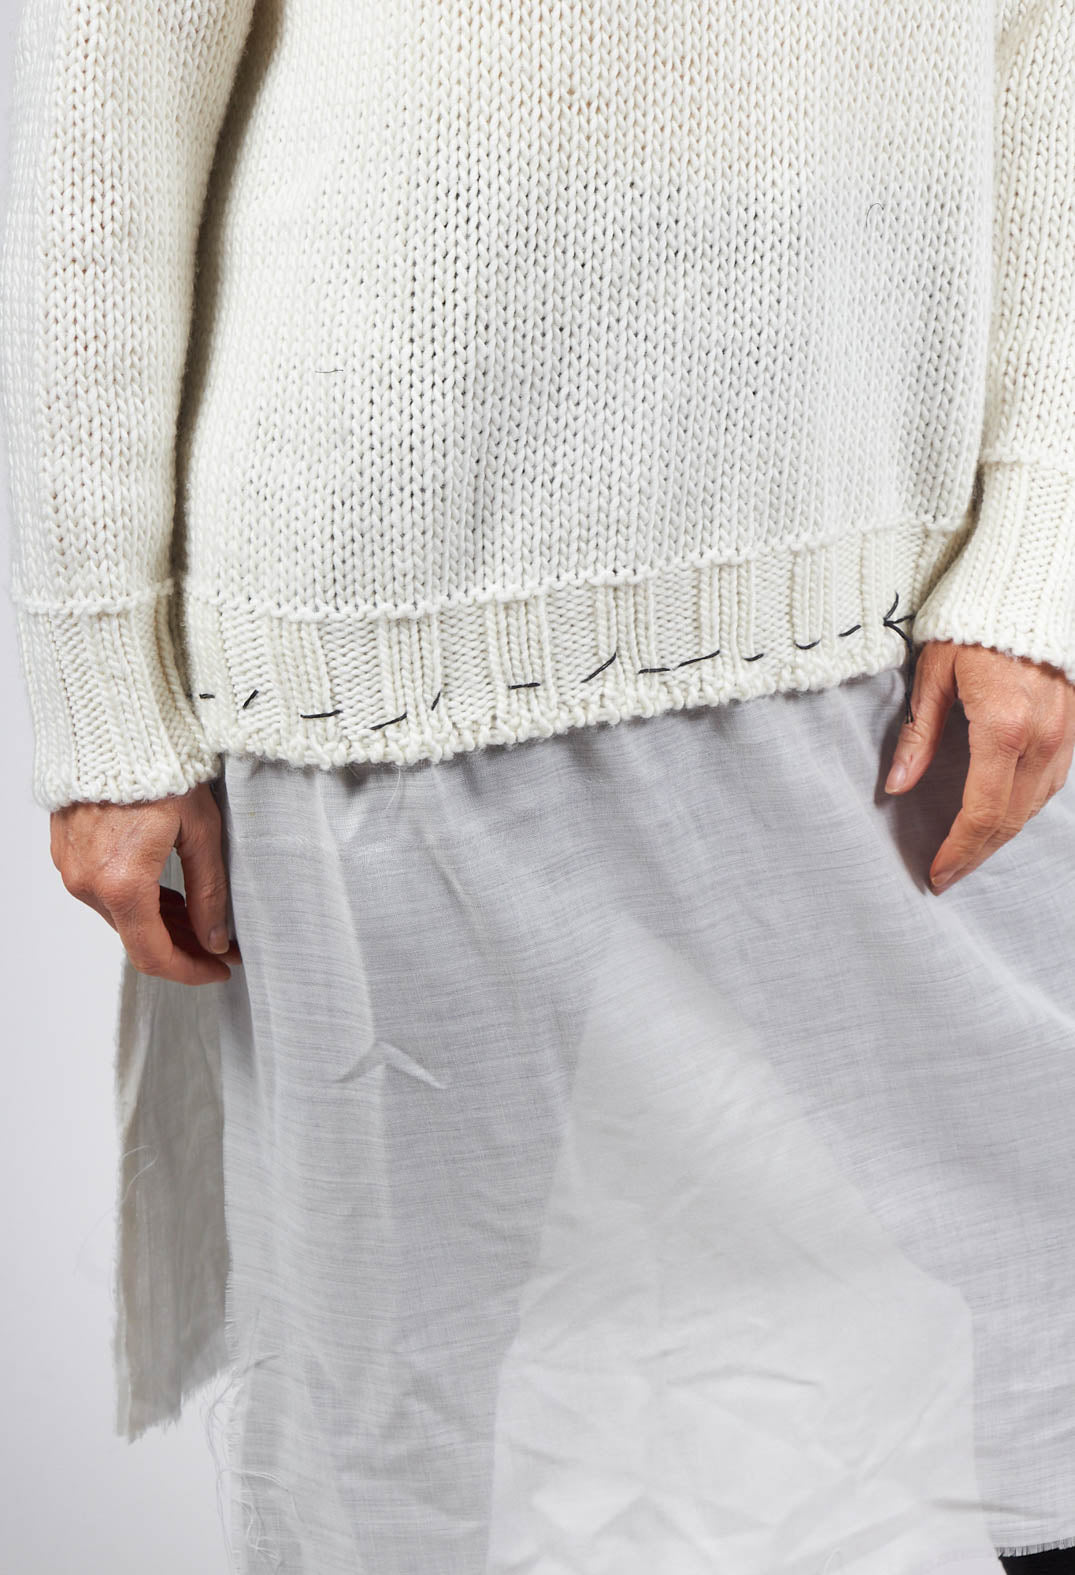 Seamed Sweater with Gauze in Cream